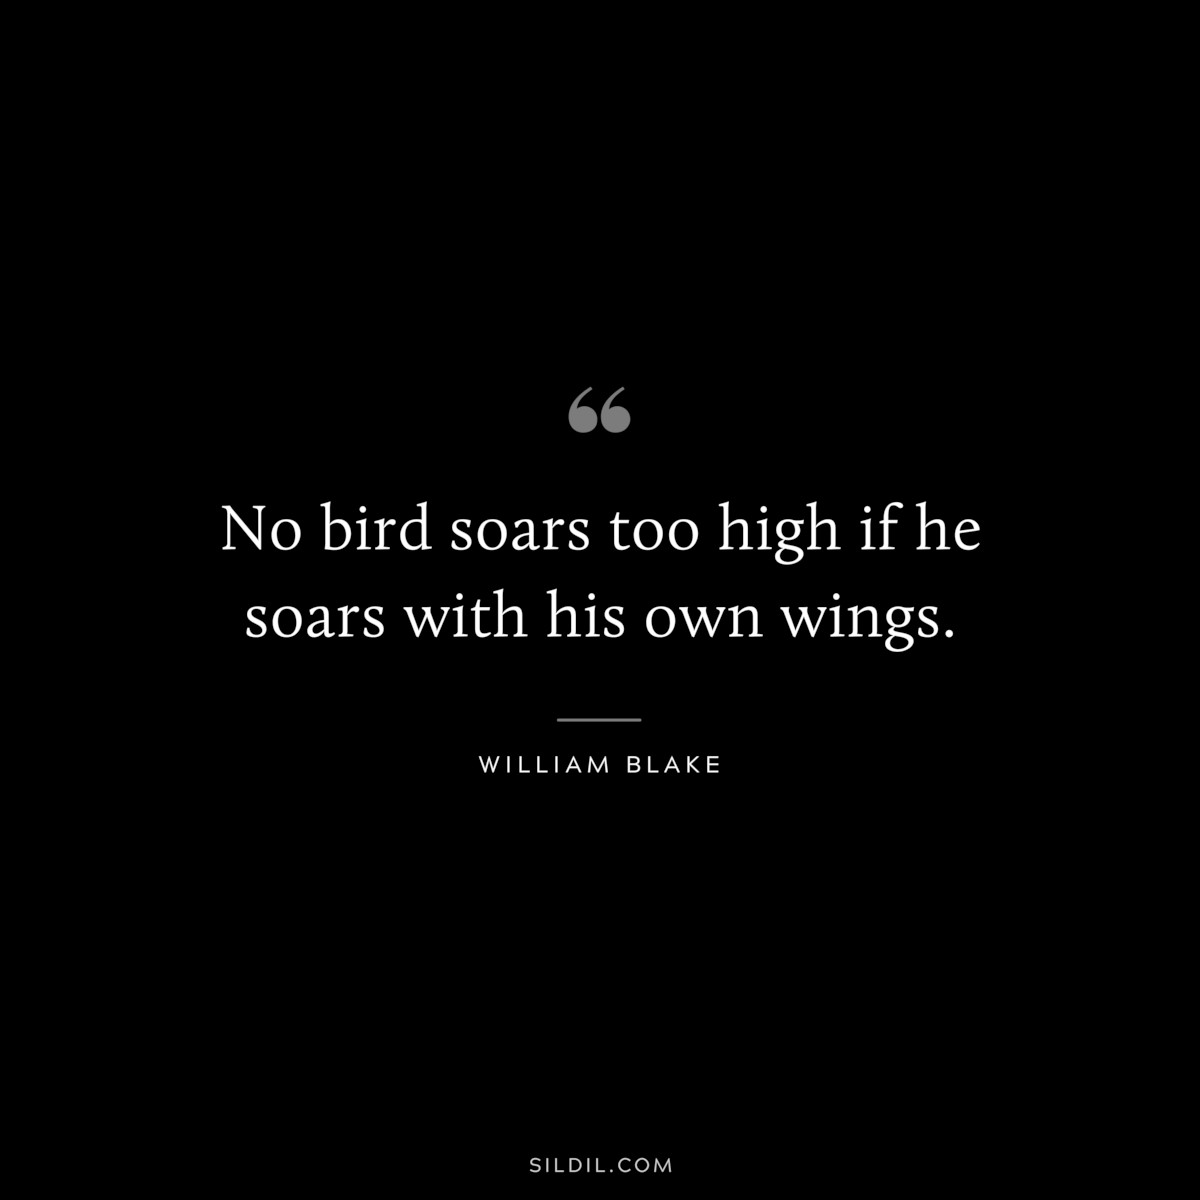 No bird soars too high if he soars with his own wings. ― William Blake